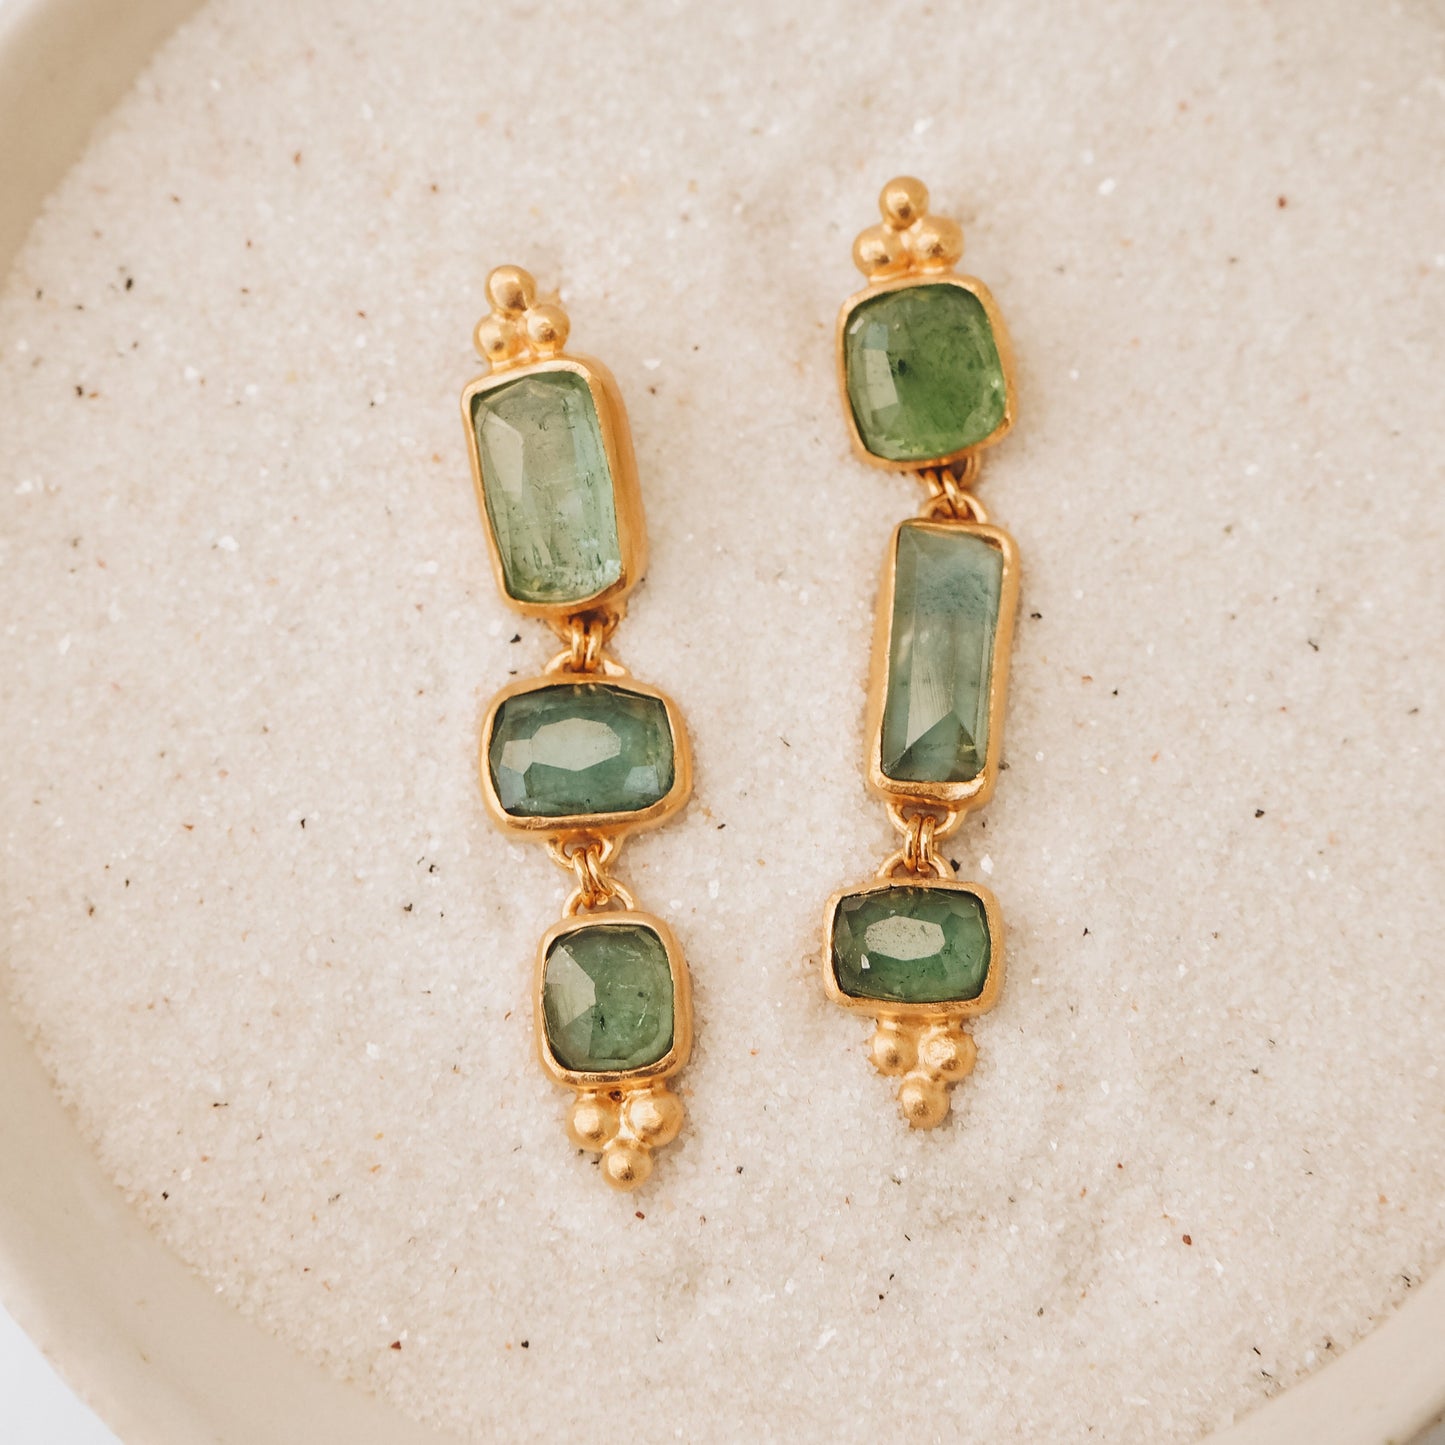 Exquisite gold earrings showcasing square rose cut tourmaline gemstone drops in ocean blue and green, accentuated by meticulous granulation details